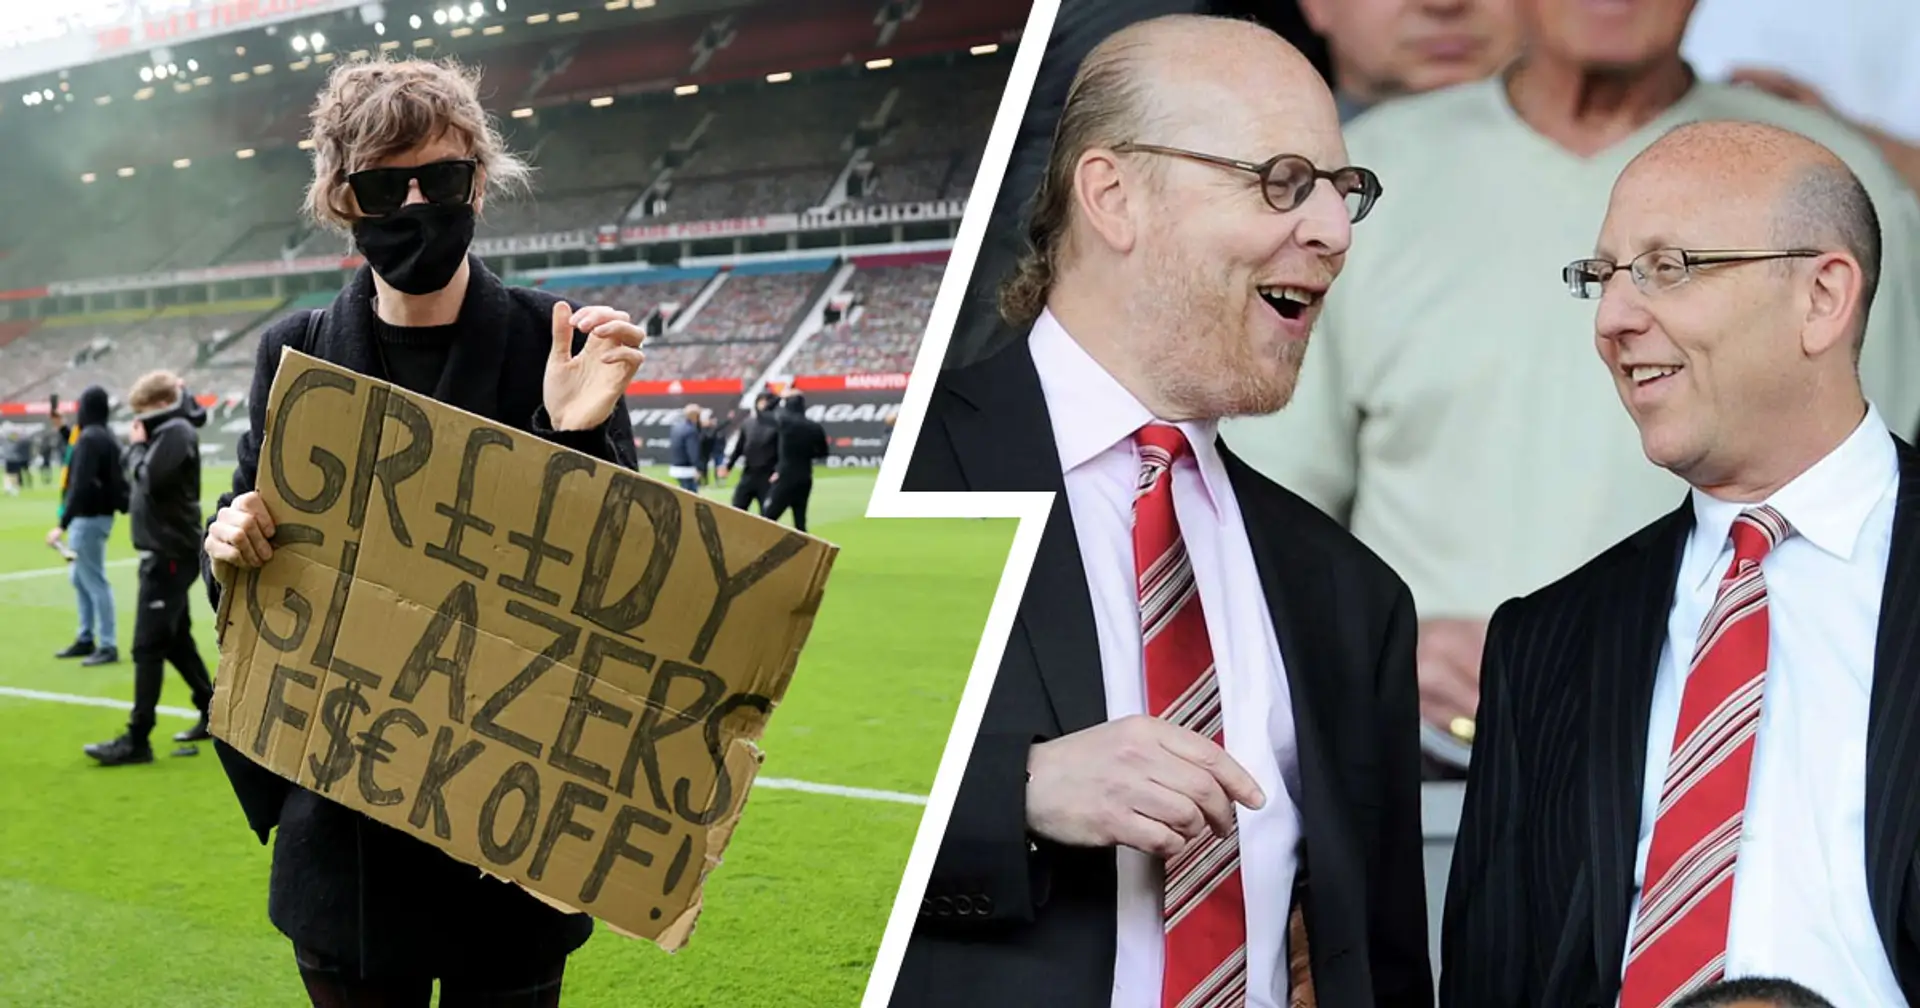 United lose £200m deal due to GlazersOut protests & 4 more big stories you might've missed